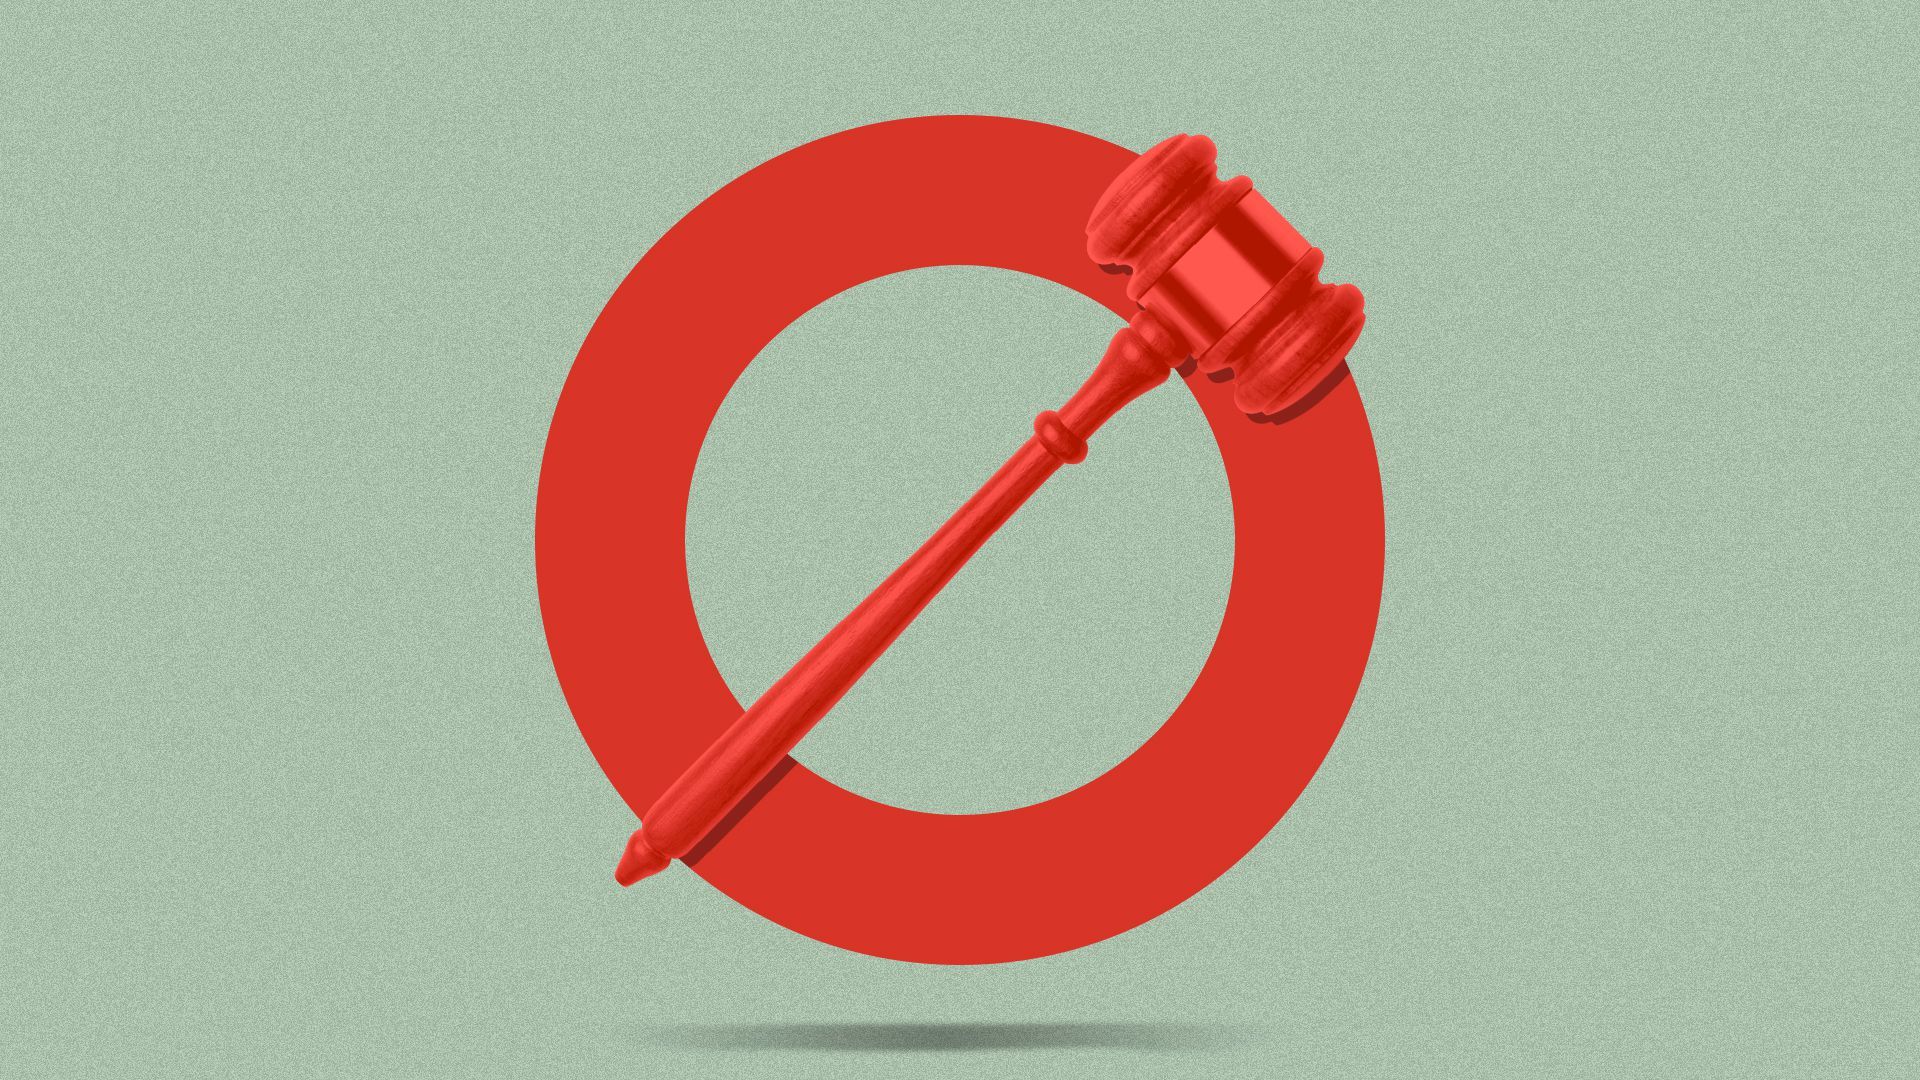 Illustration of a general prohibition symbol, with a gavel as a crossbar.